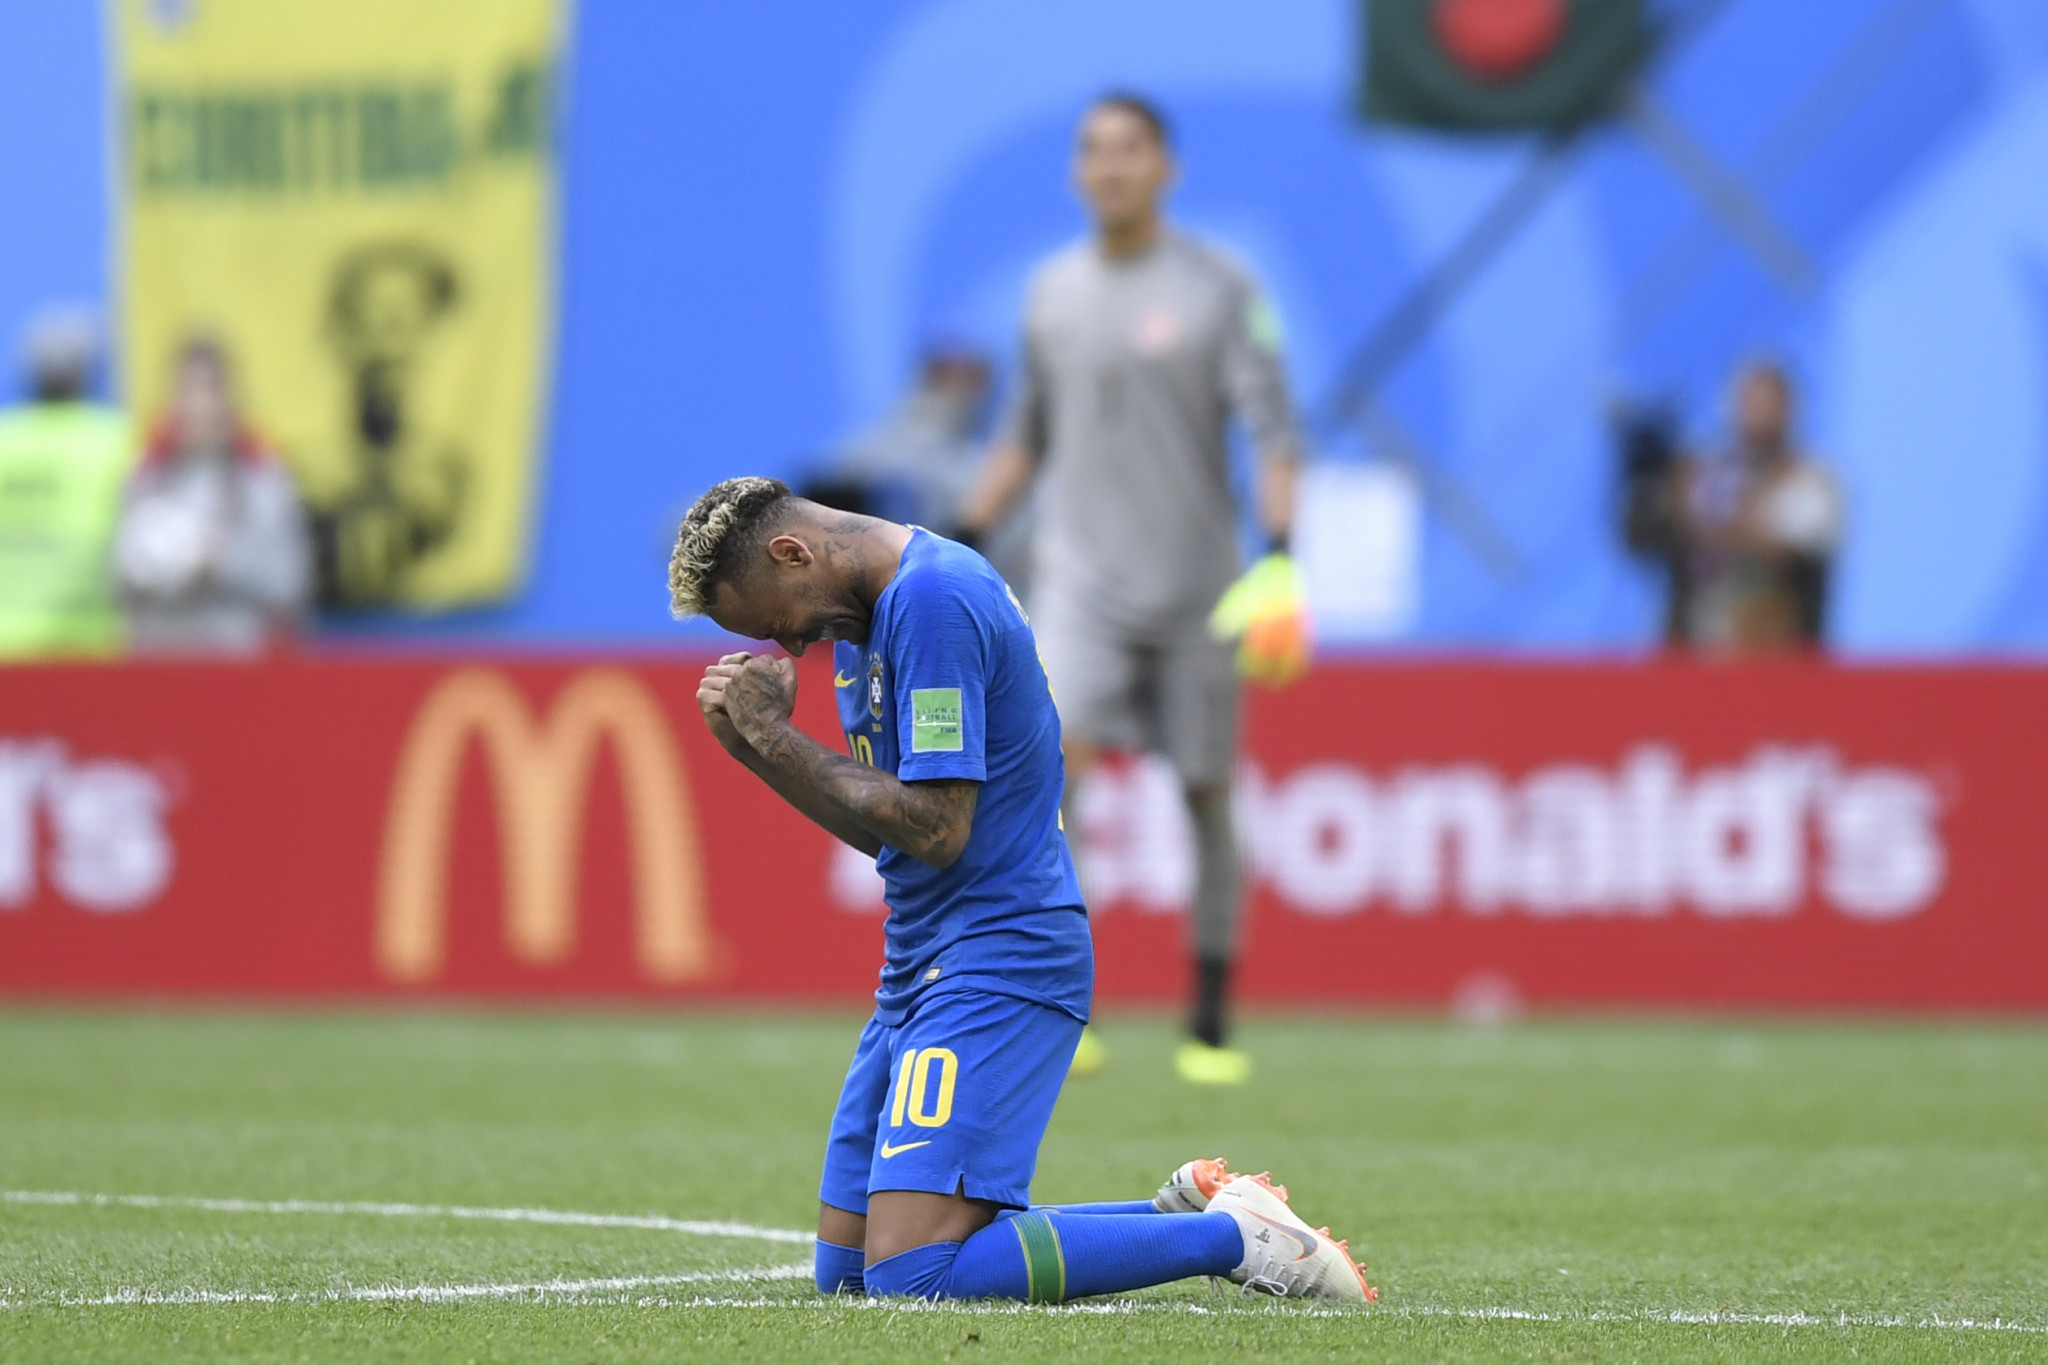 Wins for Brazil, Switzerland and Nigeria as action continues at FIFA World Cup